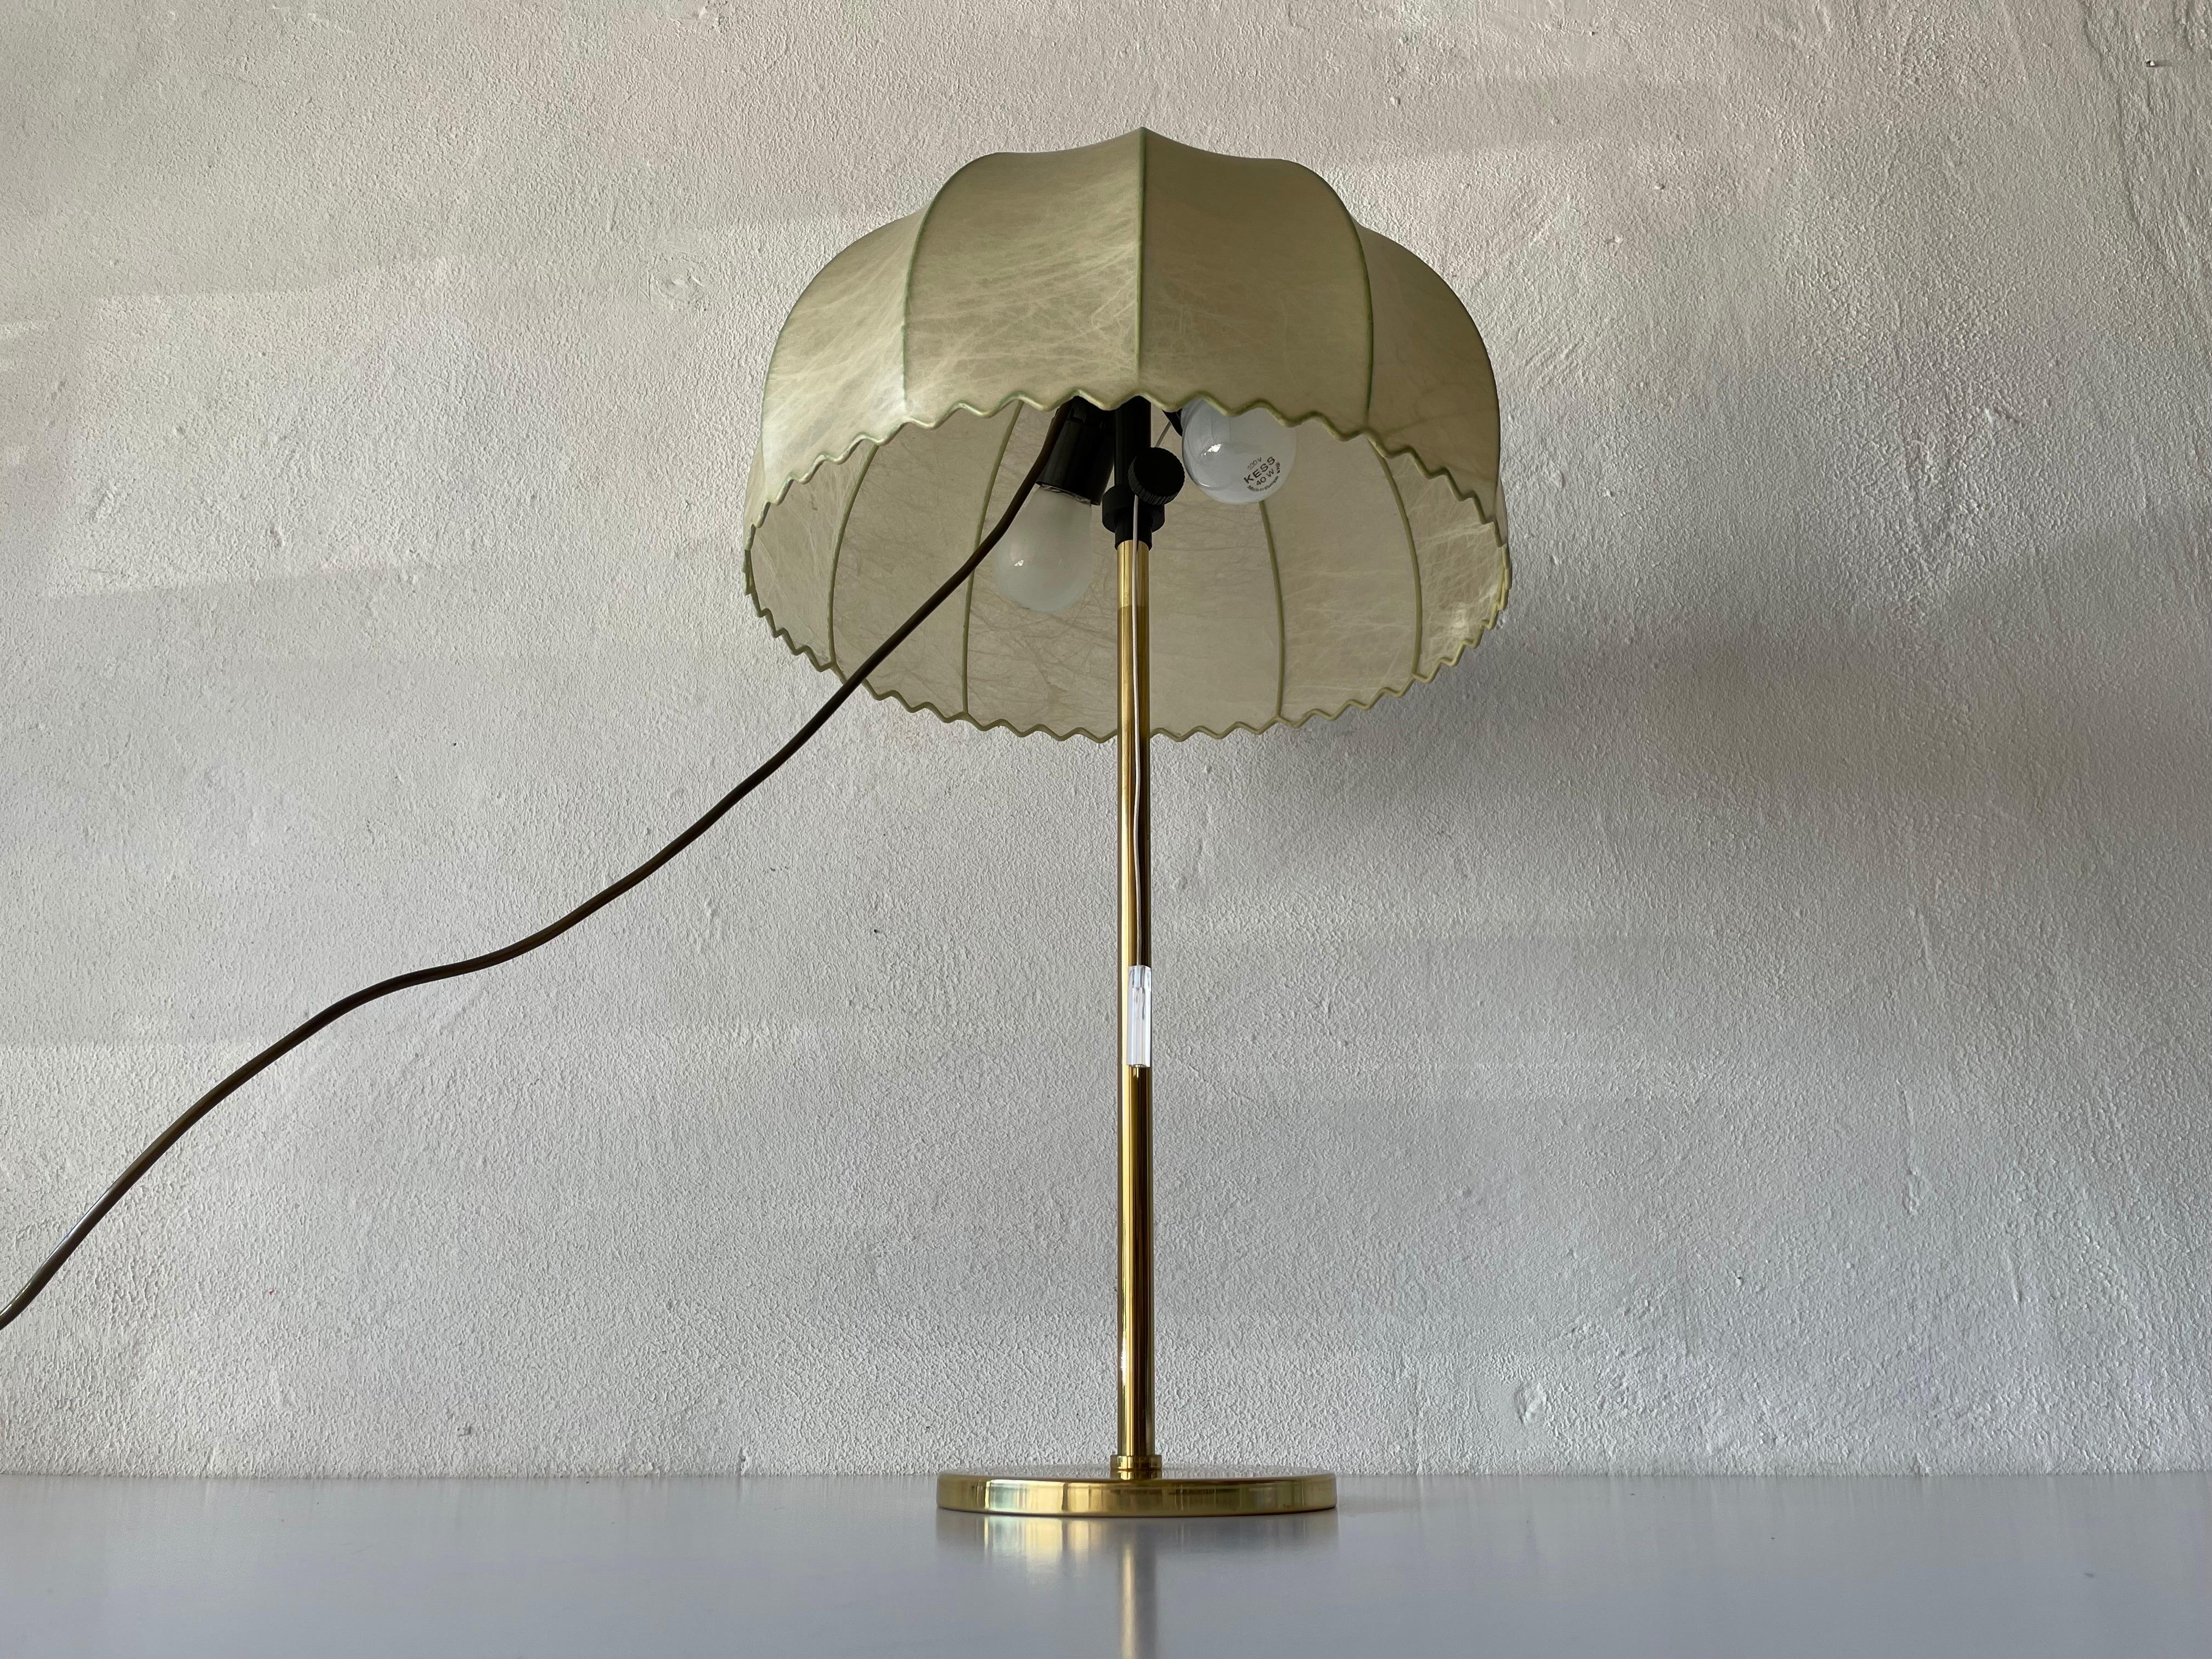 Cocoon adjustable height table lamp by Goldkant, 1970s, Germany

Lamp height can be shortened.
 
Cocoon shades & metal body

Minimal and natural design
Very high quality.
Fully functional.
Original cable and plug. These lamps are suitable